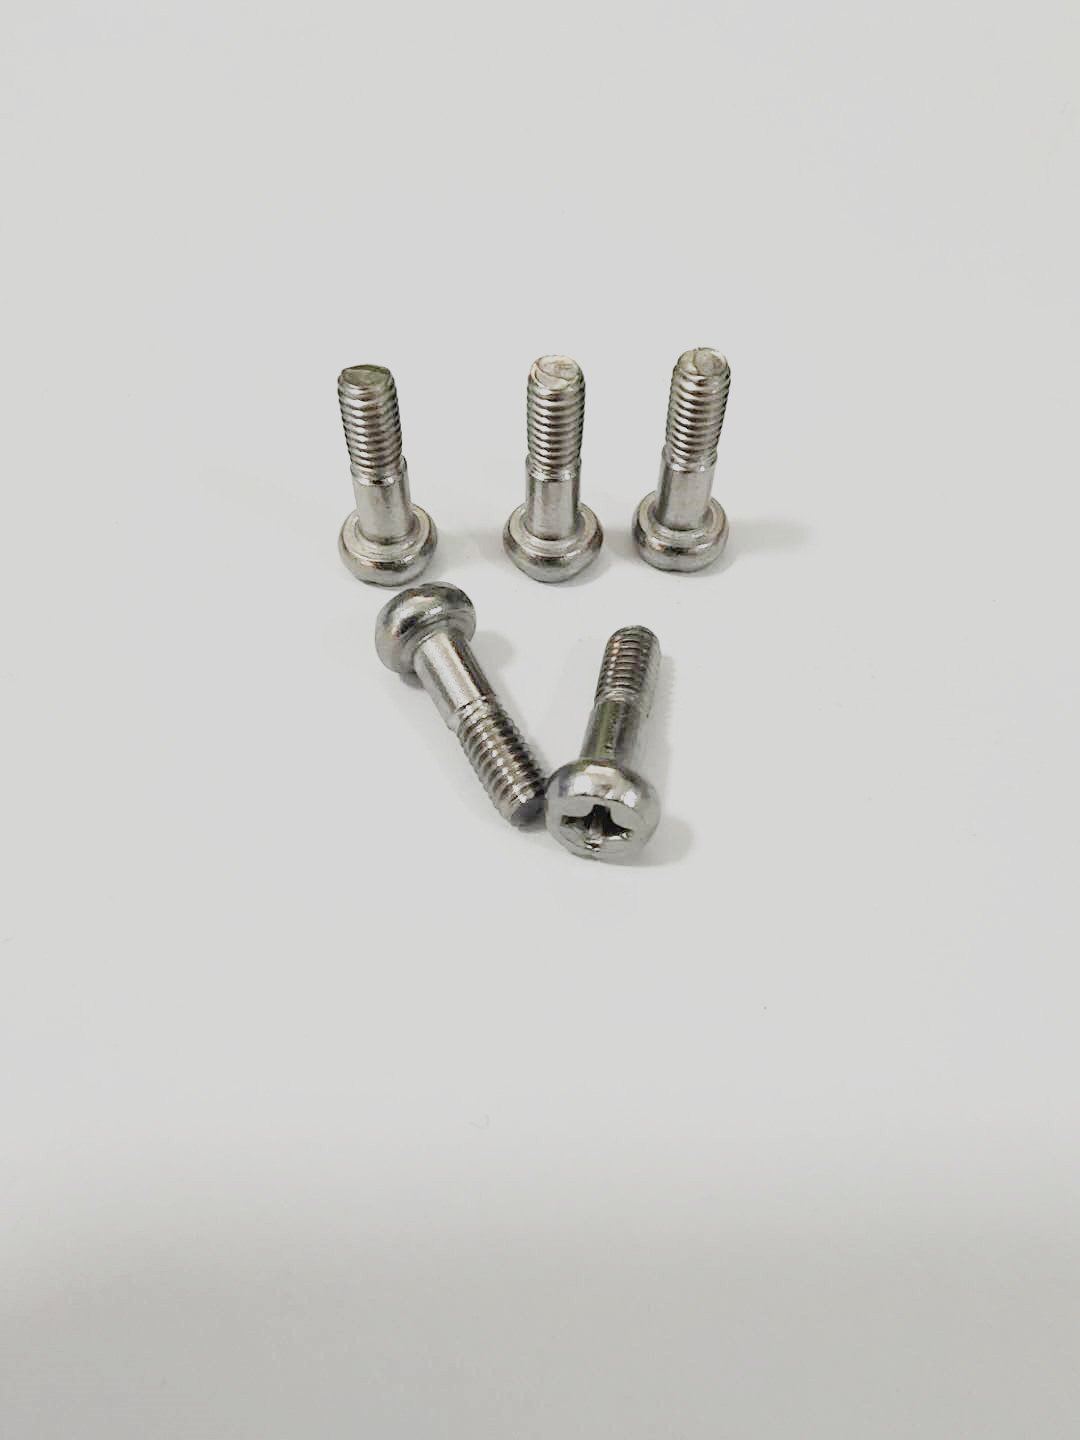 stainless cross sleeve type rotation limit screw